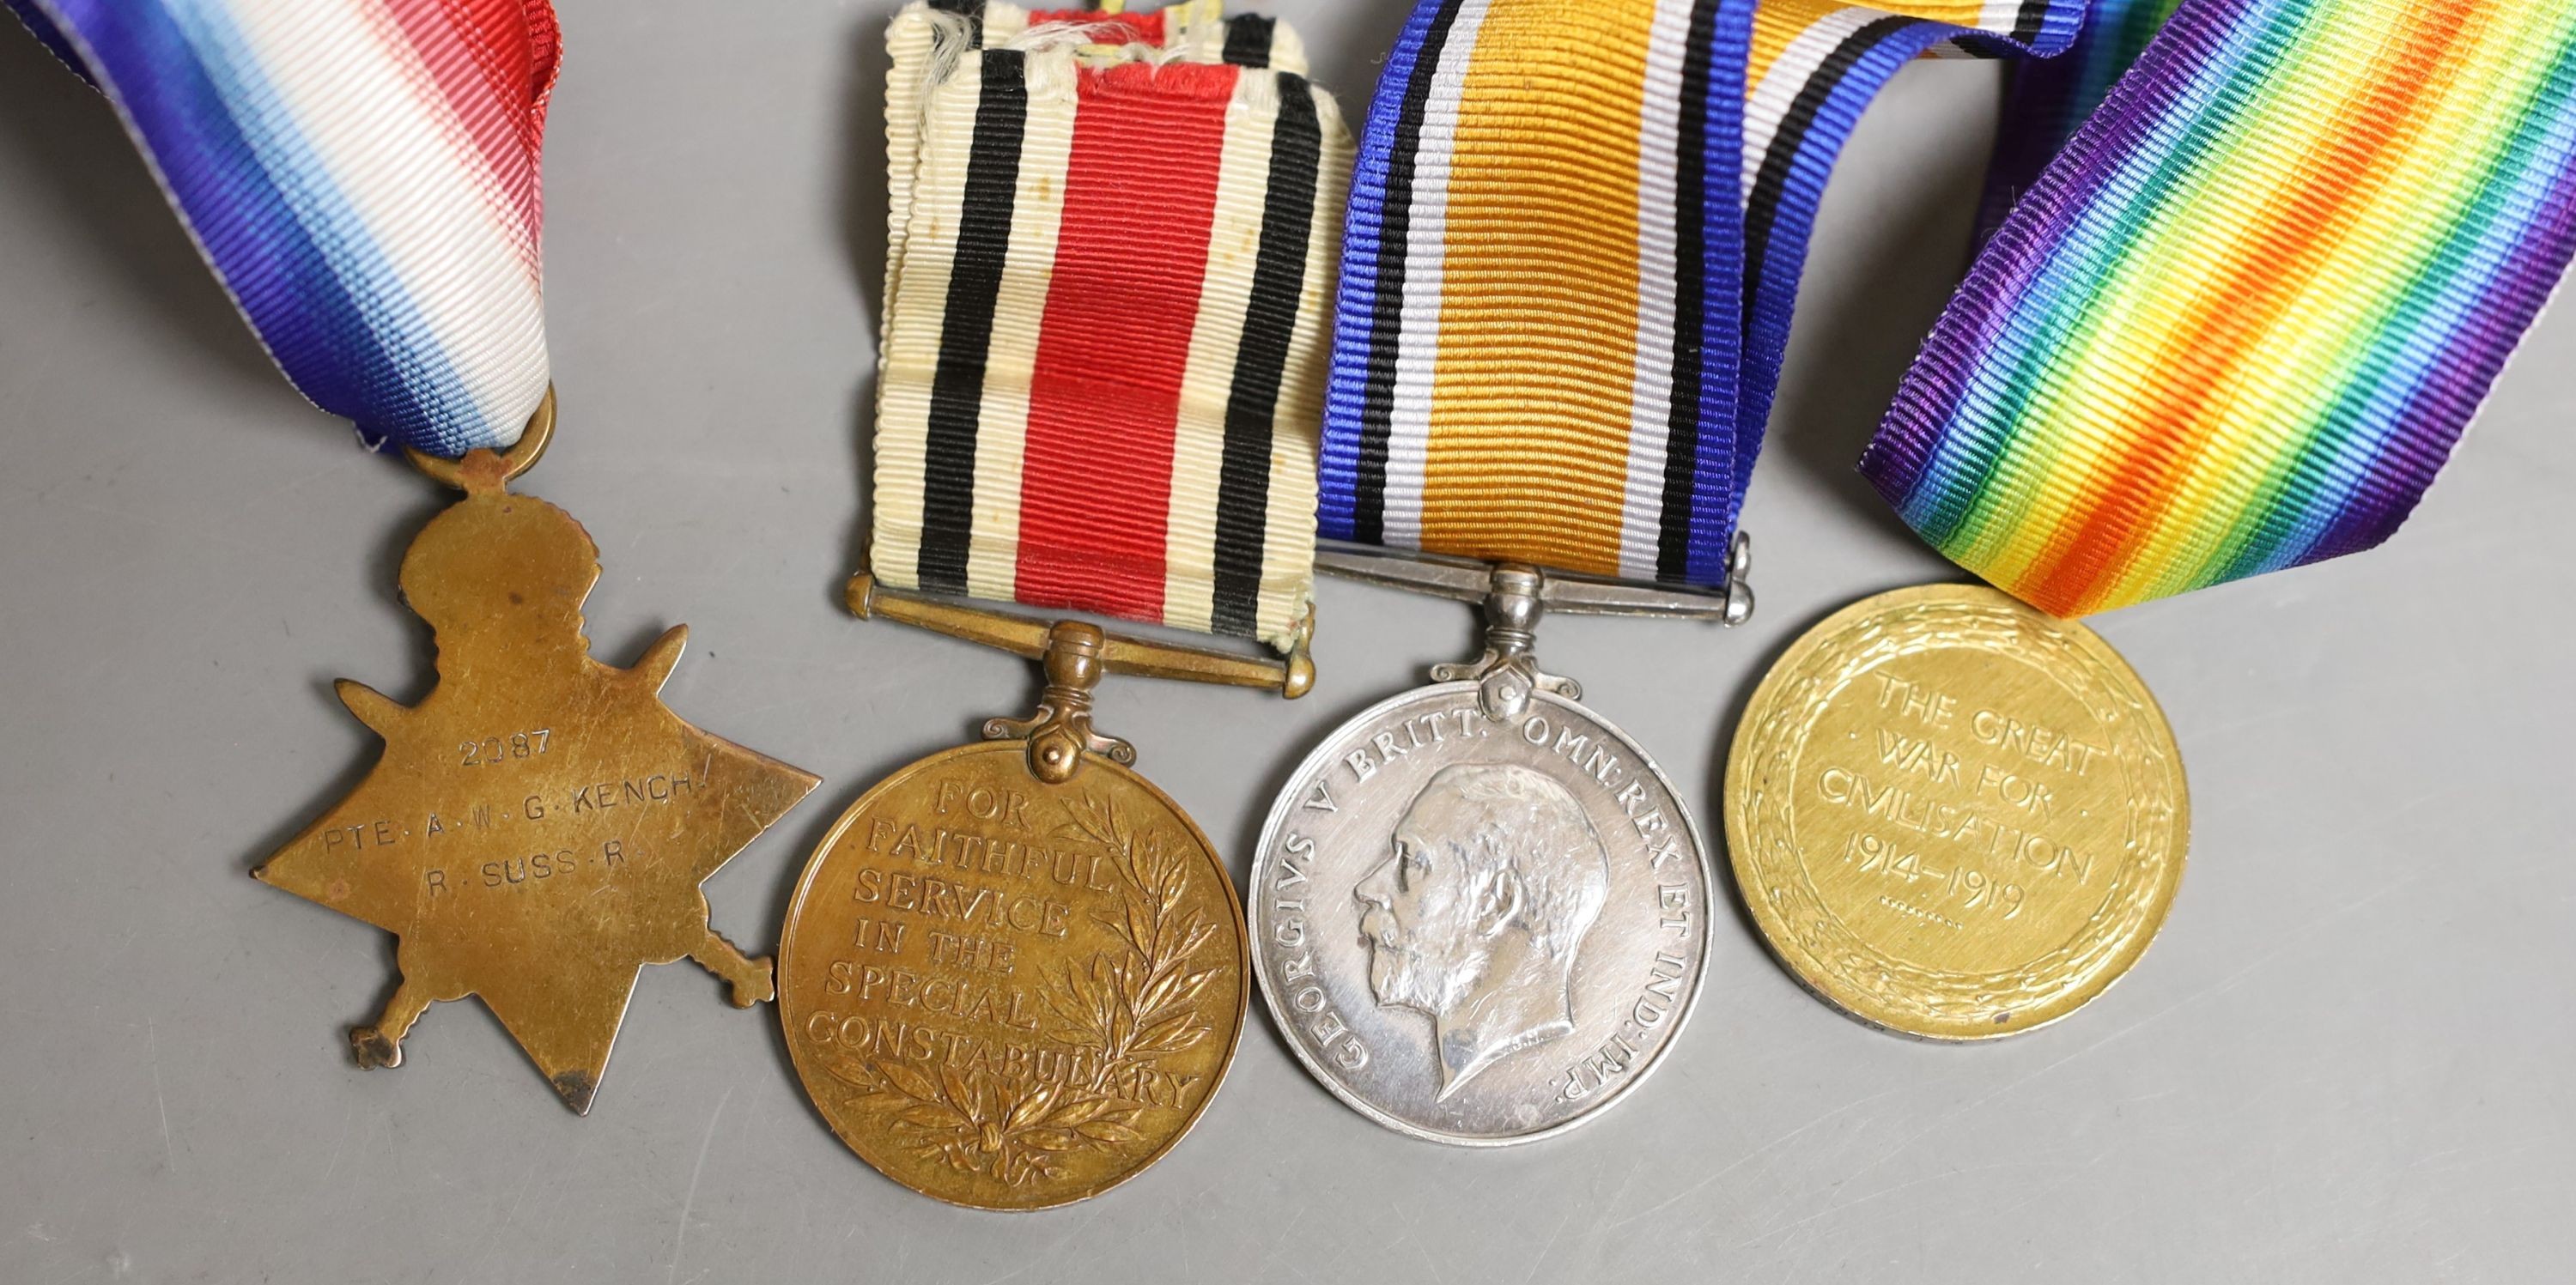 A Great War / Special Constabulary LSGC group of four medals to 2087 Private Albert William George Kench, Royal Sussex Regiment